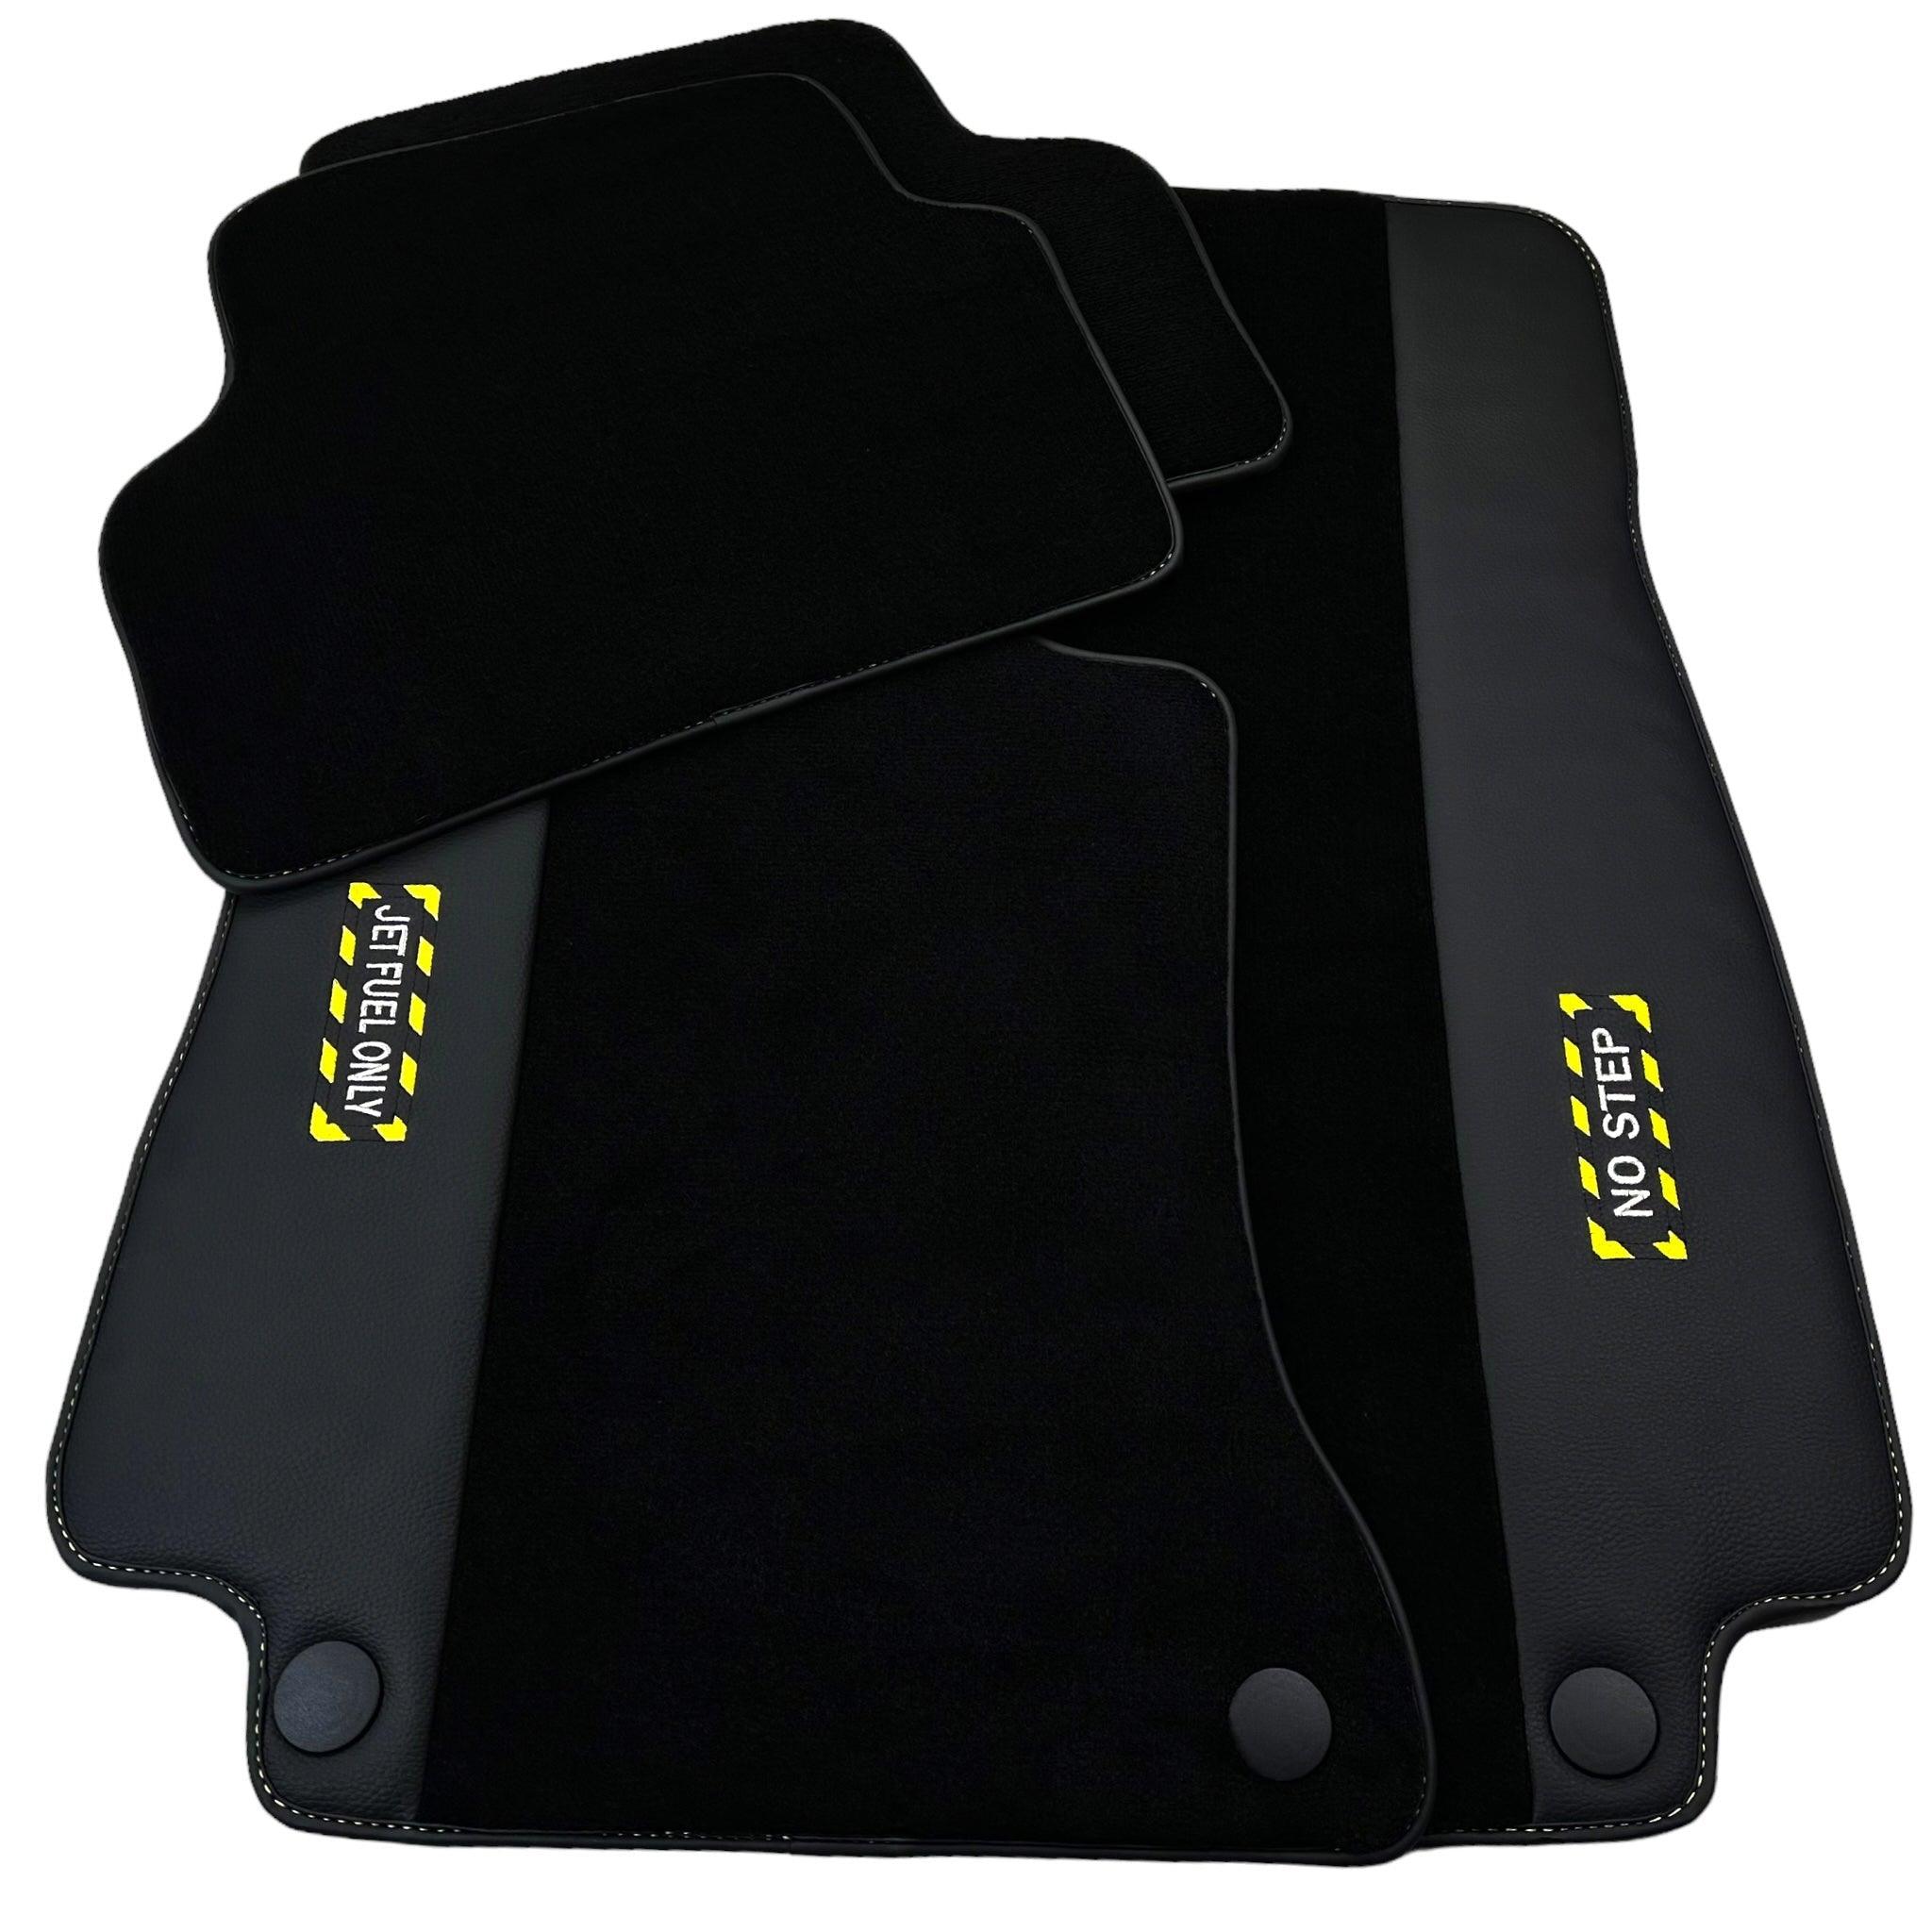 Black Floor Mats For Mercedes Benz S-Class X222 Maybach (2015-2021) | Fighter Jet Edition